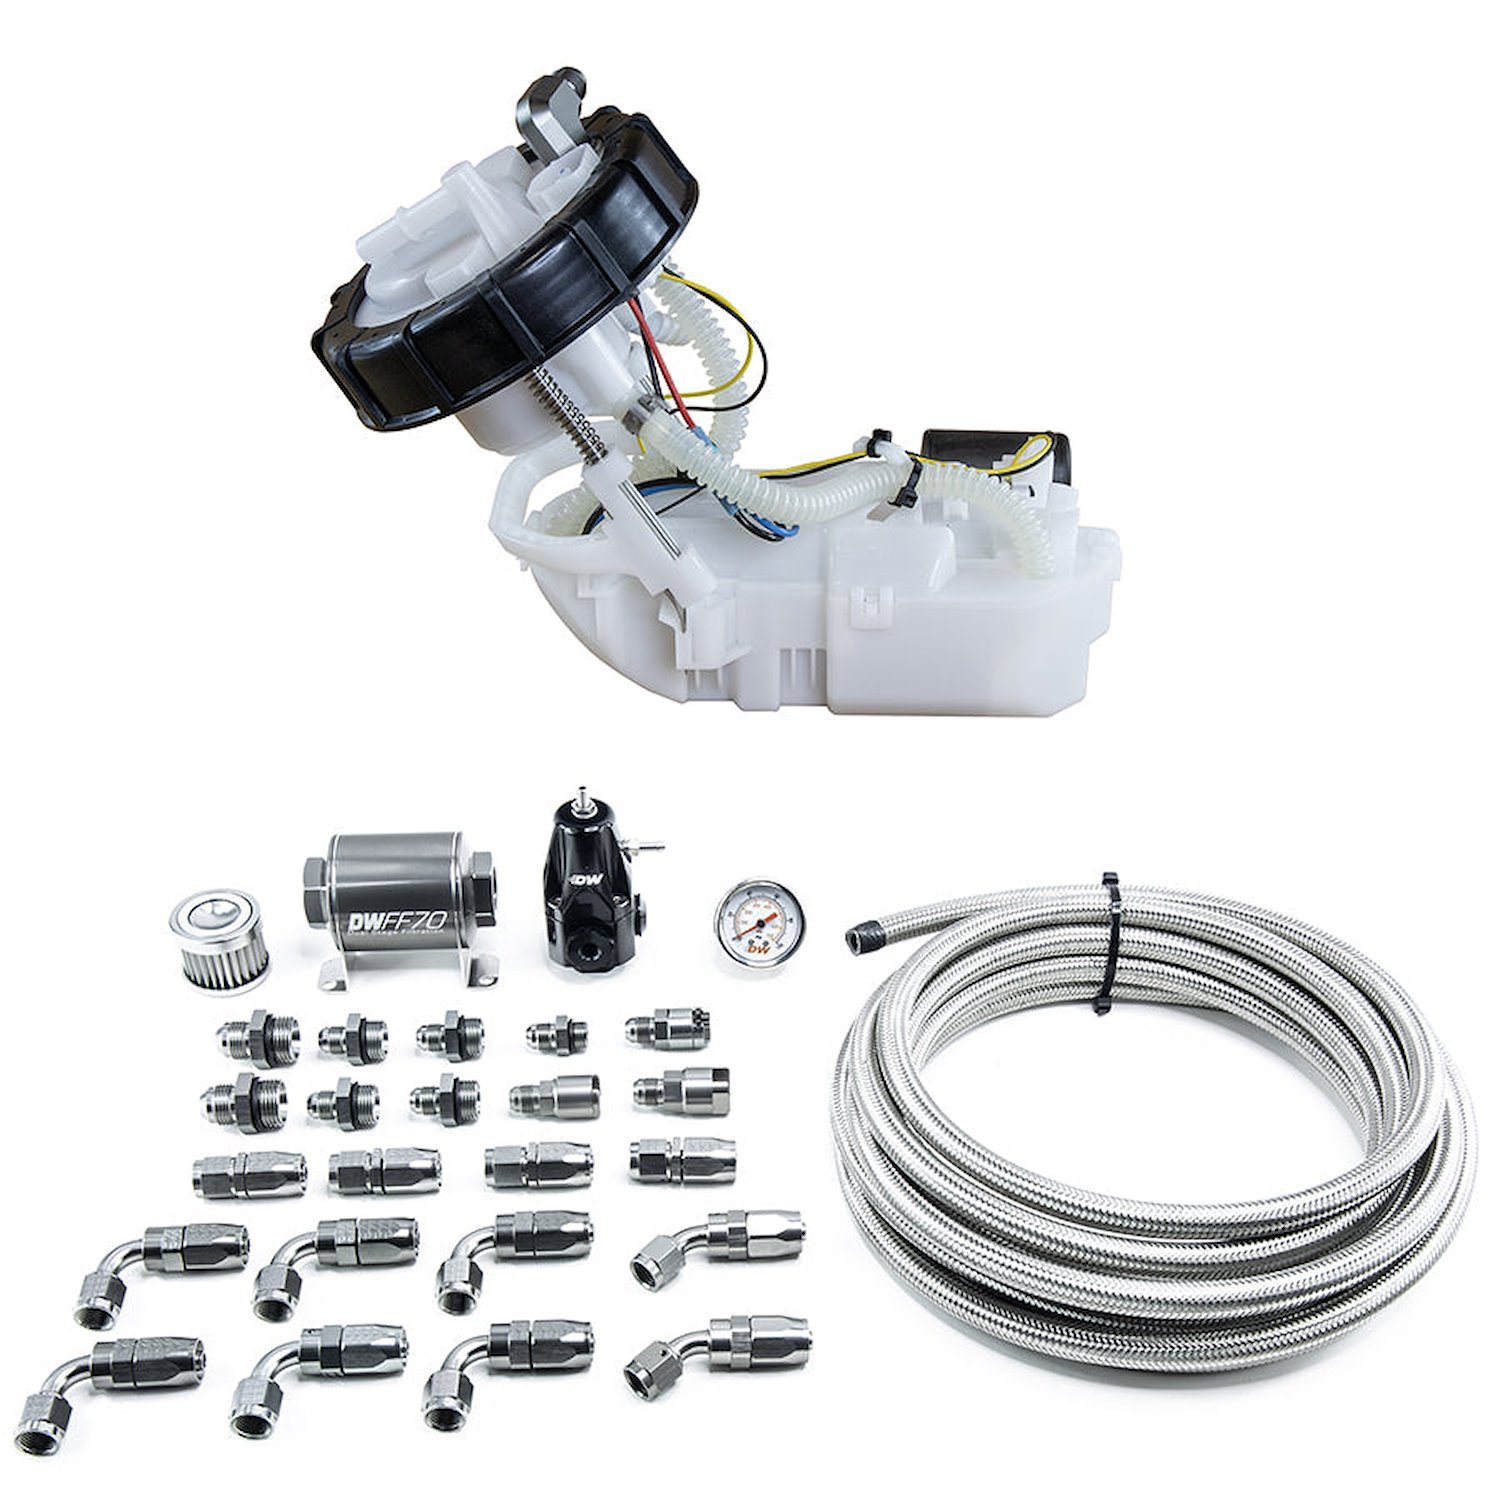 94016077040 DW400 Pump Module + Return Kit SS CPE for 7th Gen 2001-05 Honda Civic and 2002-06 Acura RSX